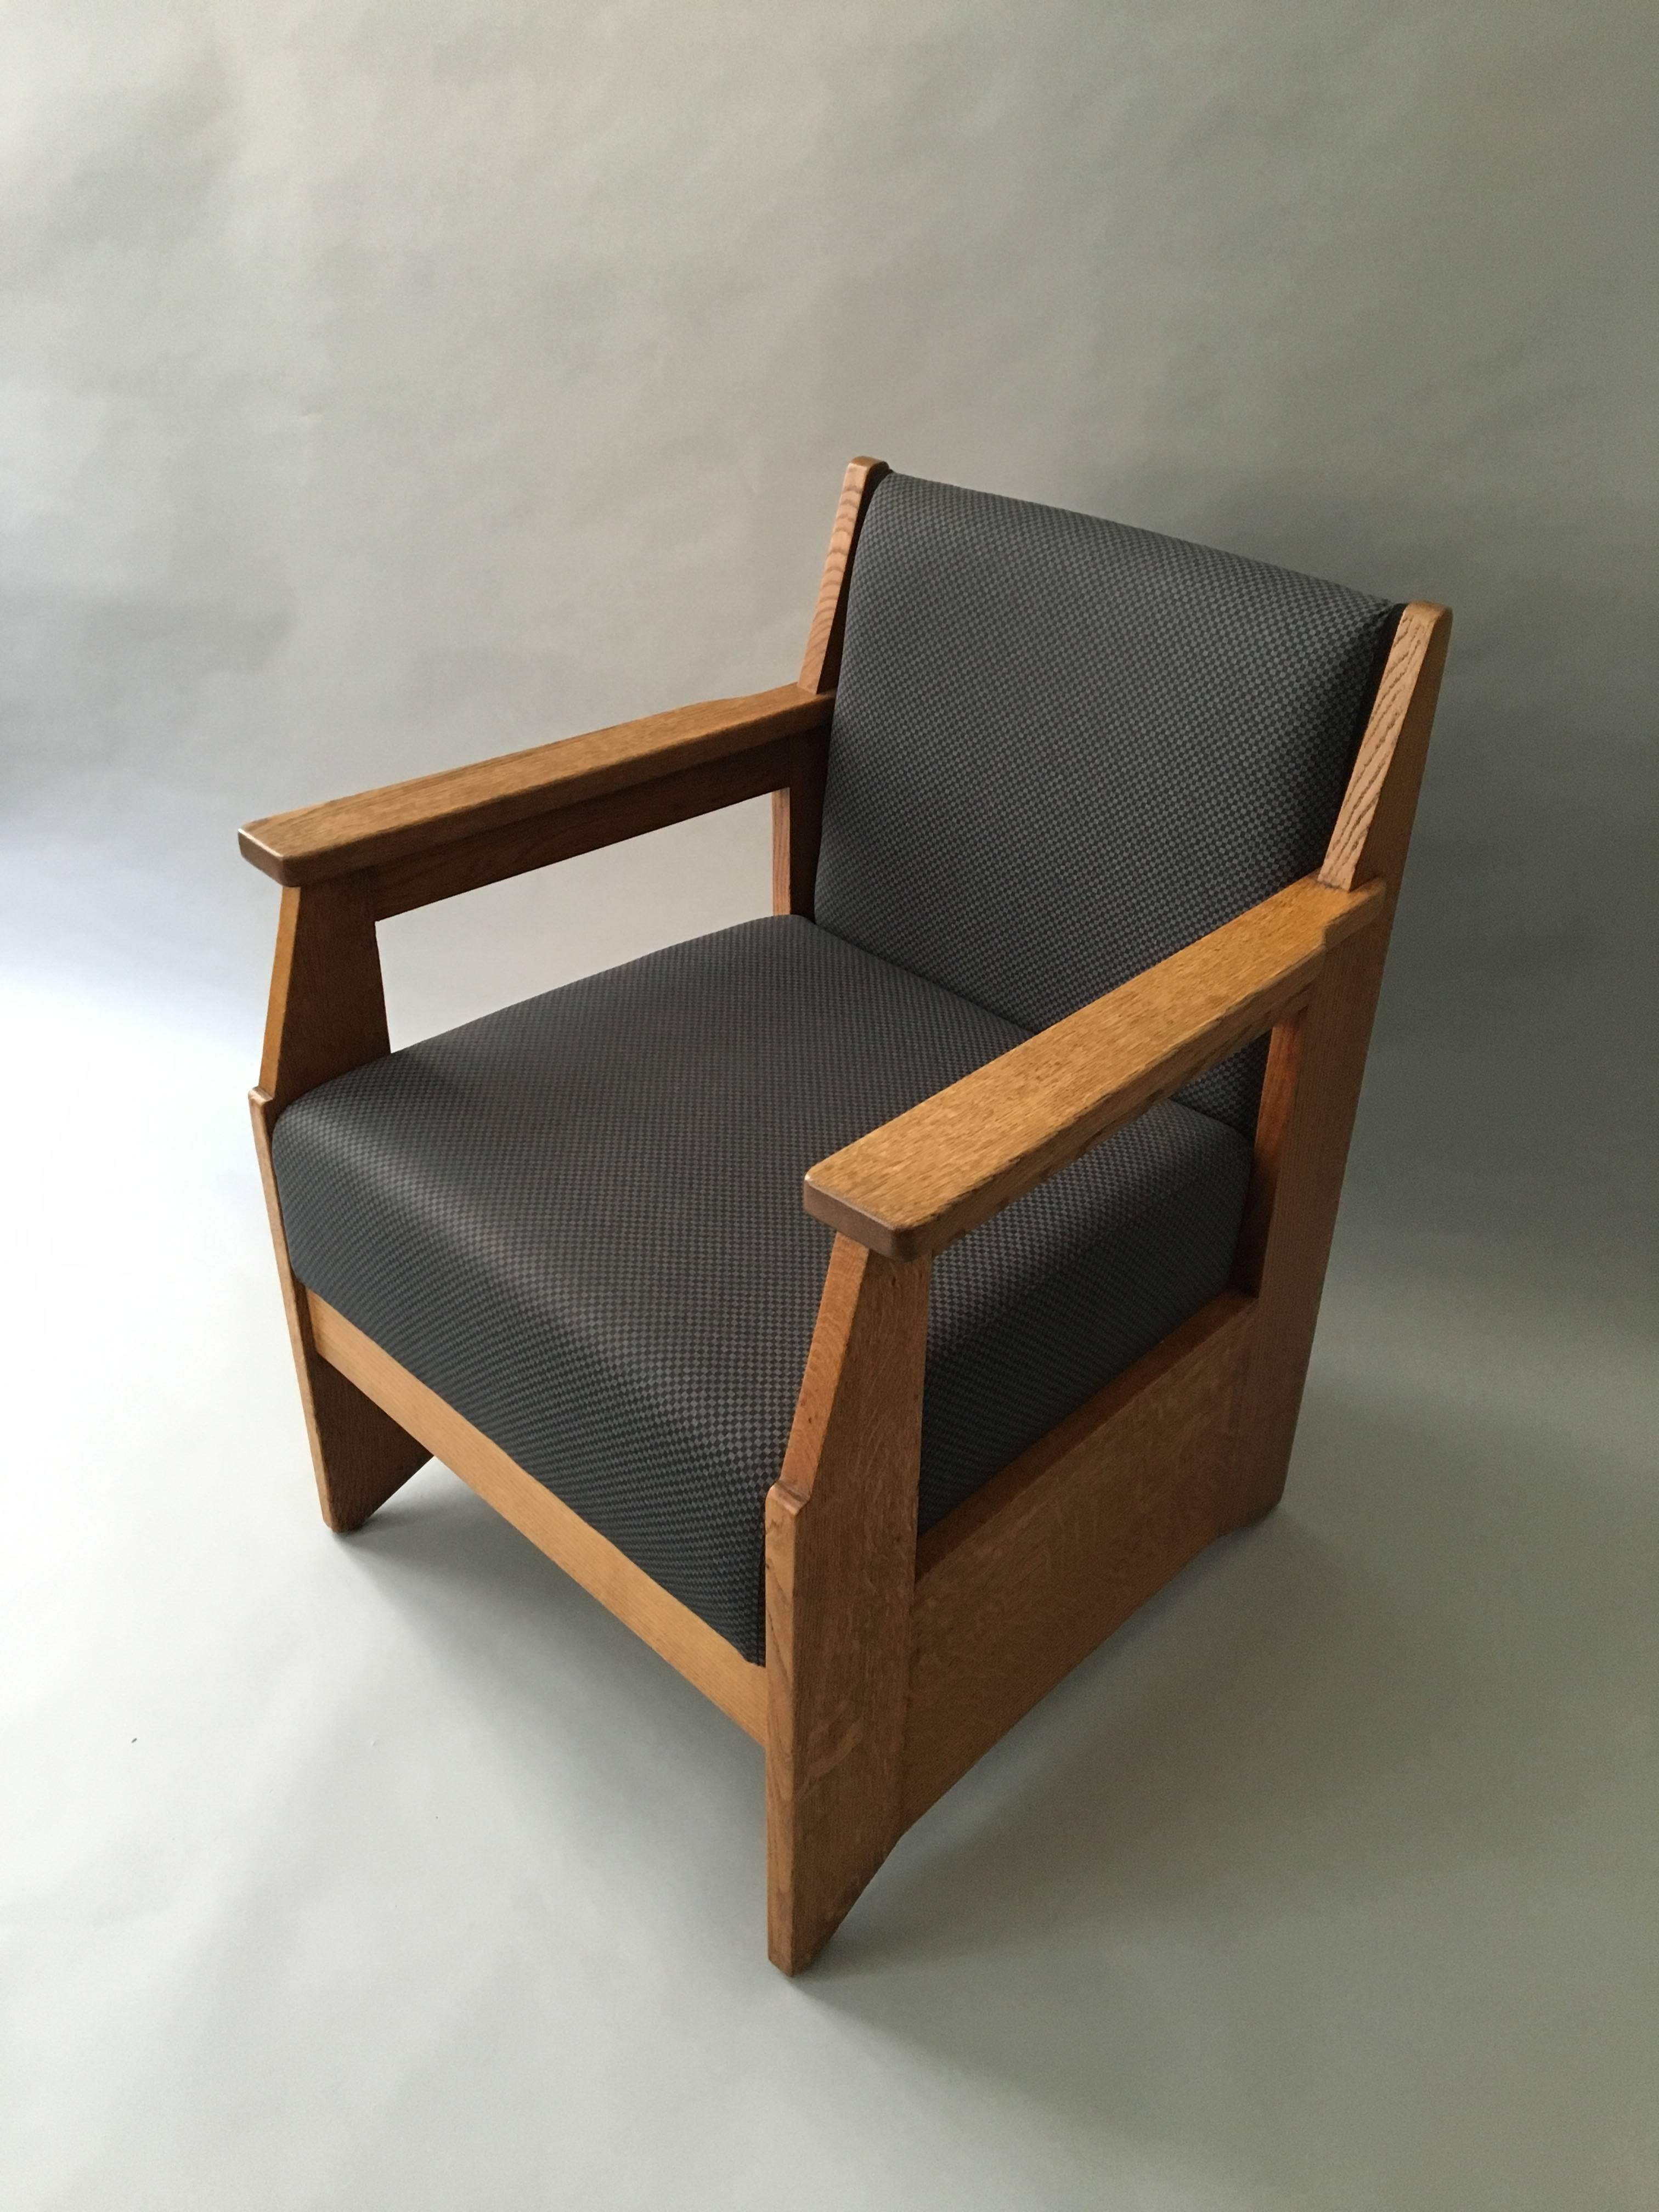 The armchairs are made in oak and re-upholstered. They where originally made in 1924. Hendrik Wouda was one of the most well known architect/Designers from The Hague School in Holland. The armchairs have the Pander & Son stamp underneath each